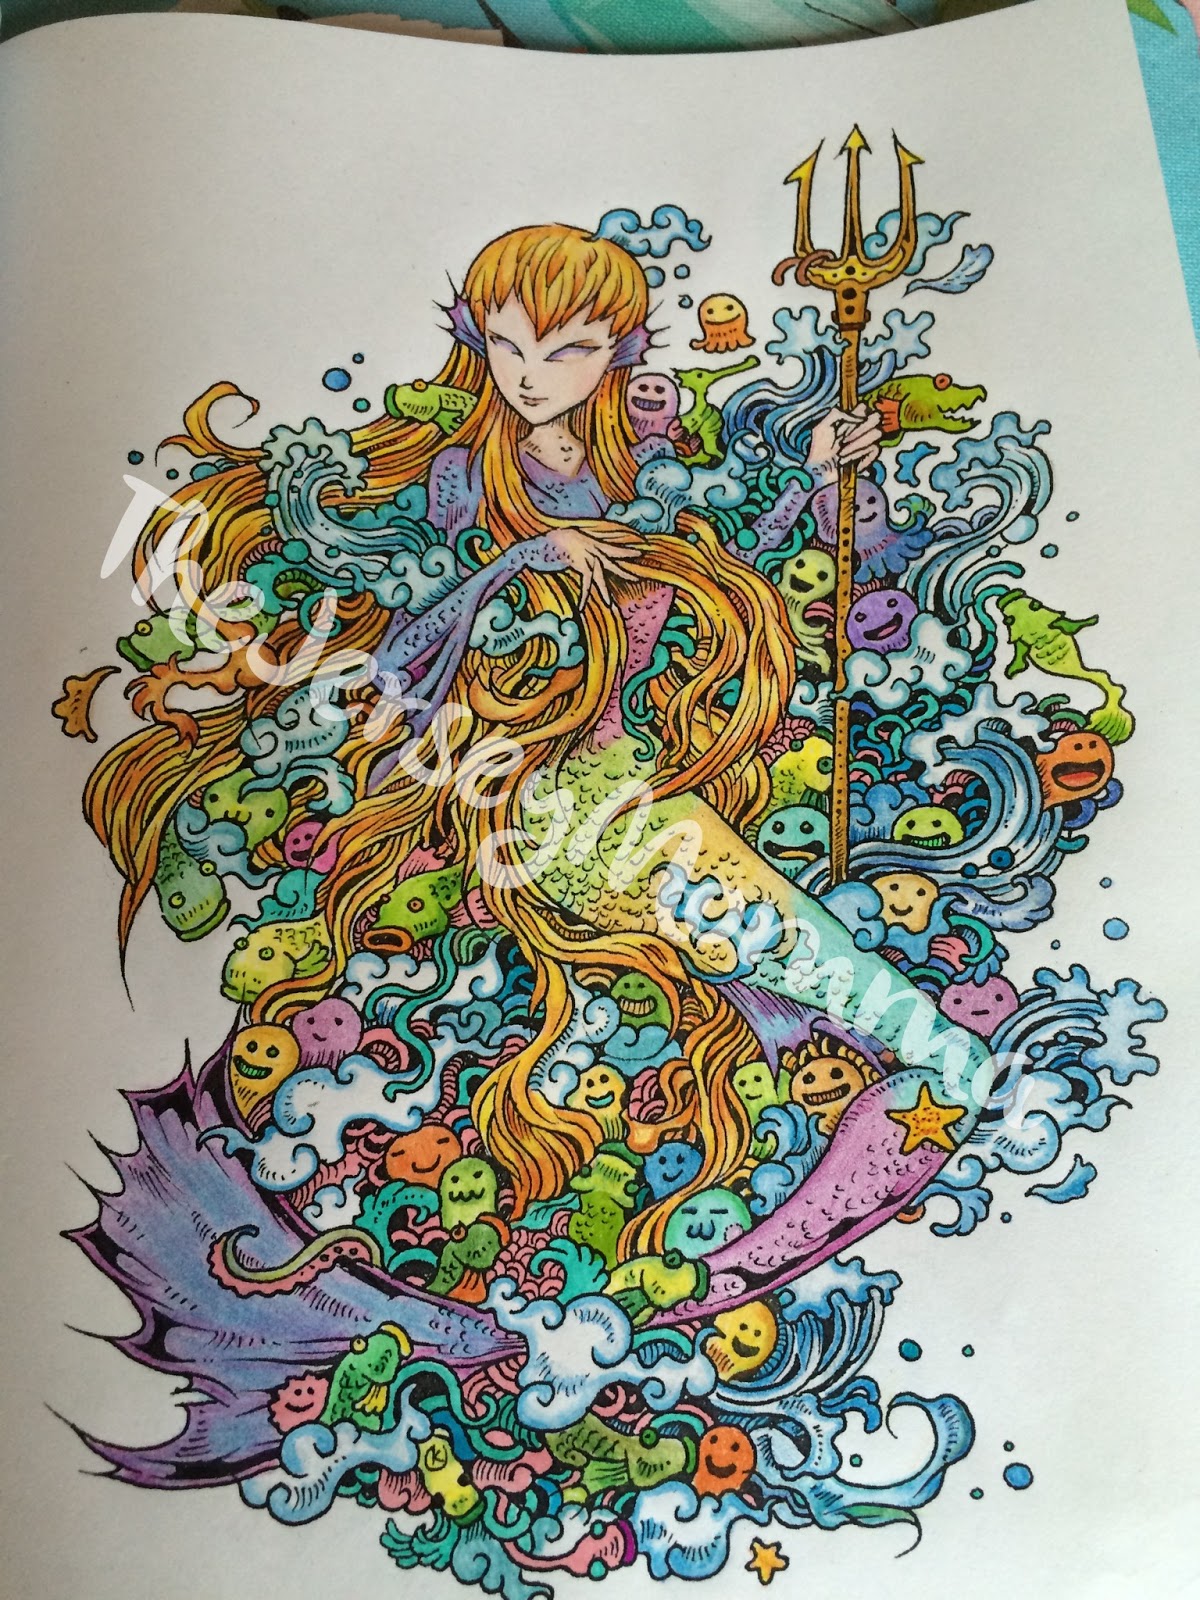 Download The Jersey Momma: The Best Adult Coloring Books